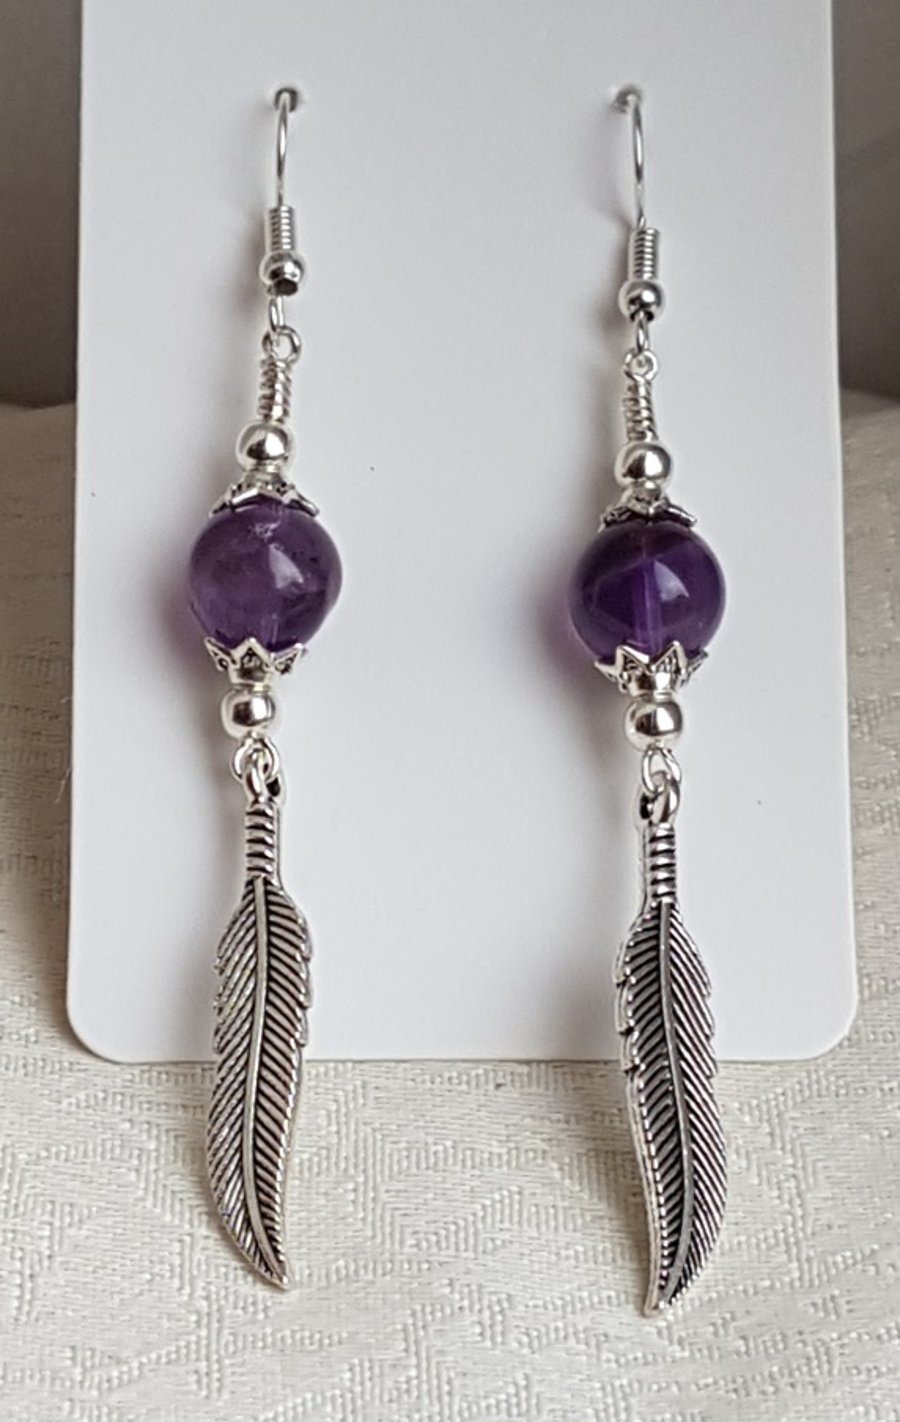 Gorgeous Amethyst Bead and Feather Charm Earrings.